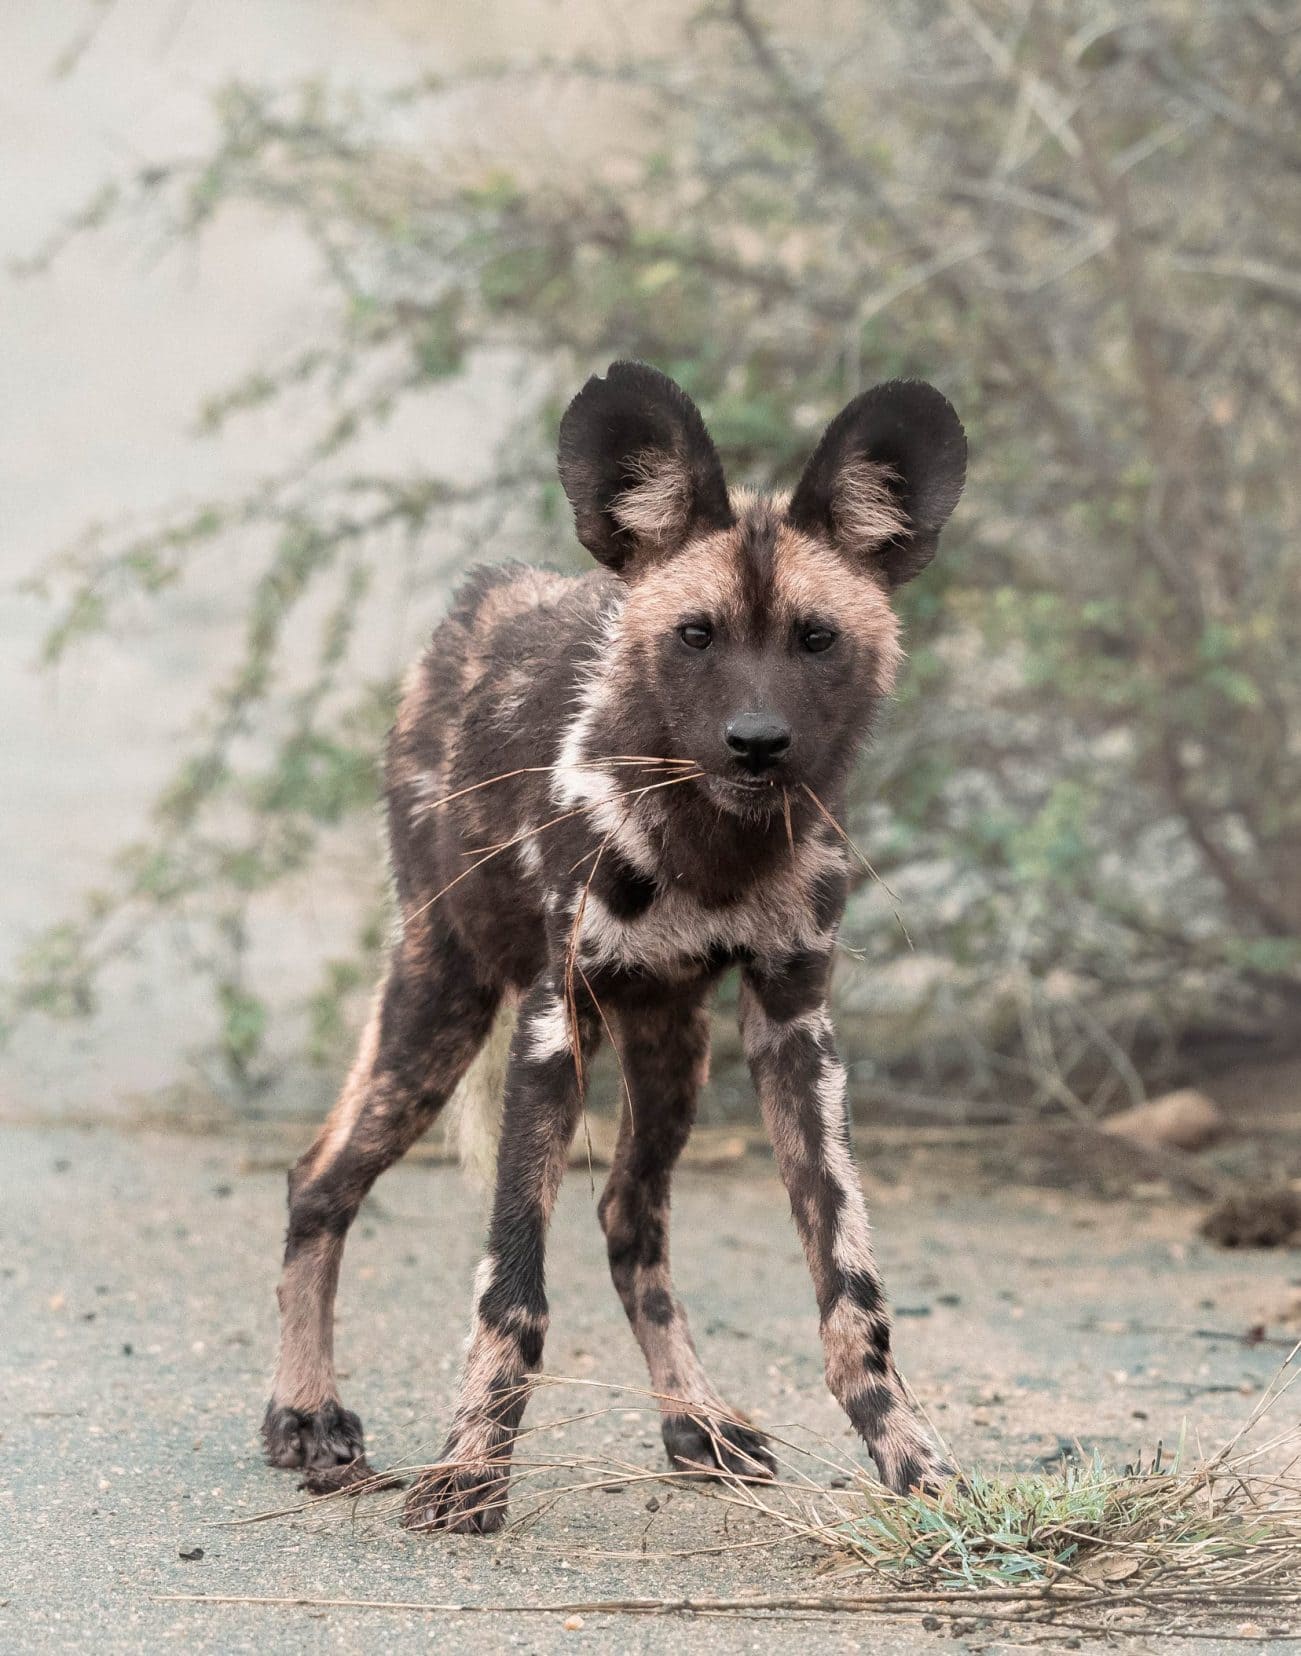 African Wild dog with grass in mouth 